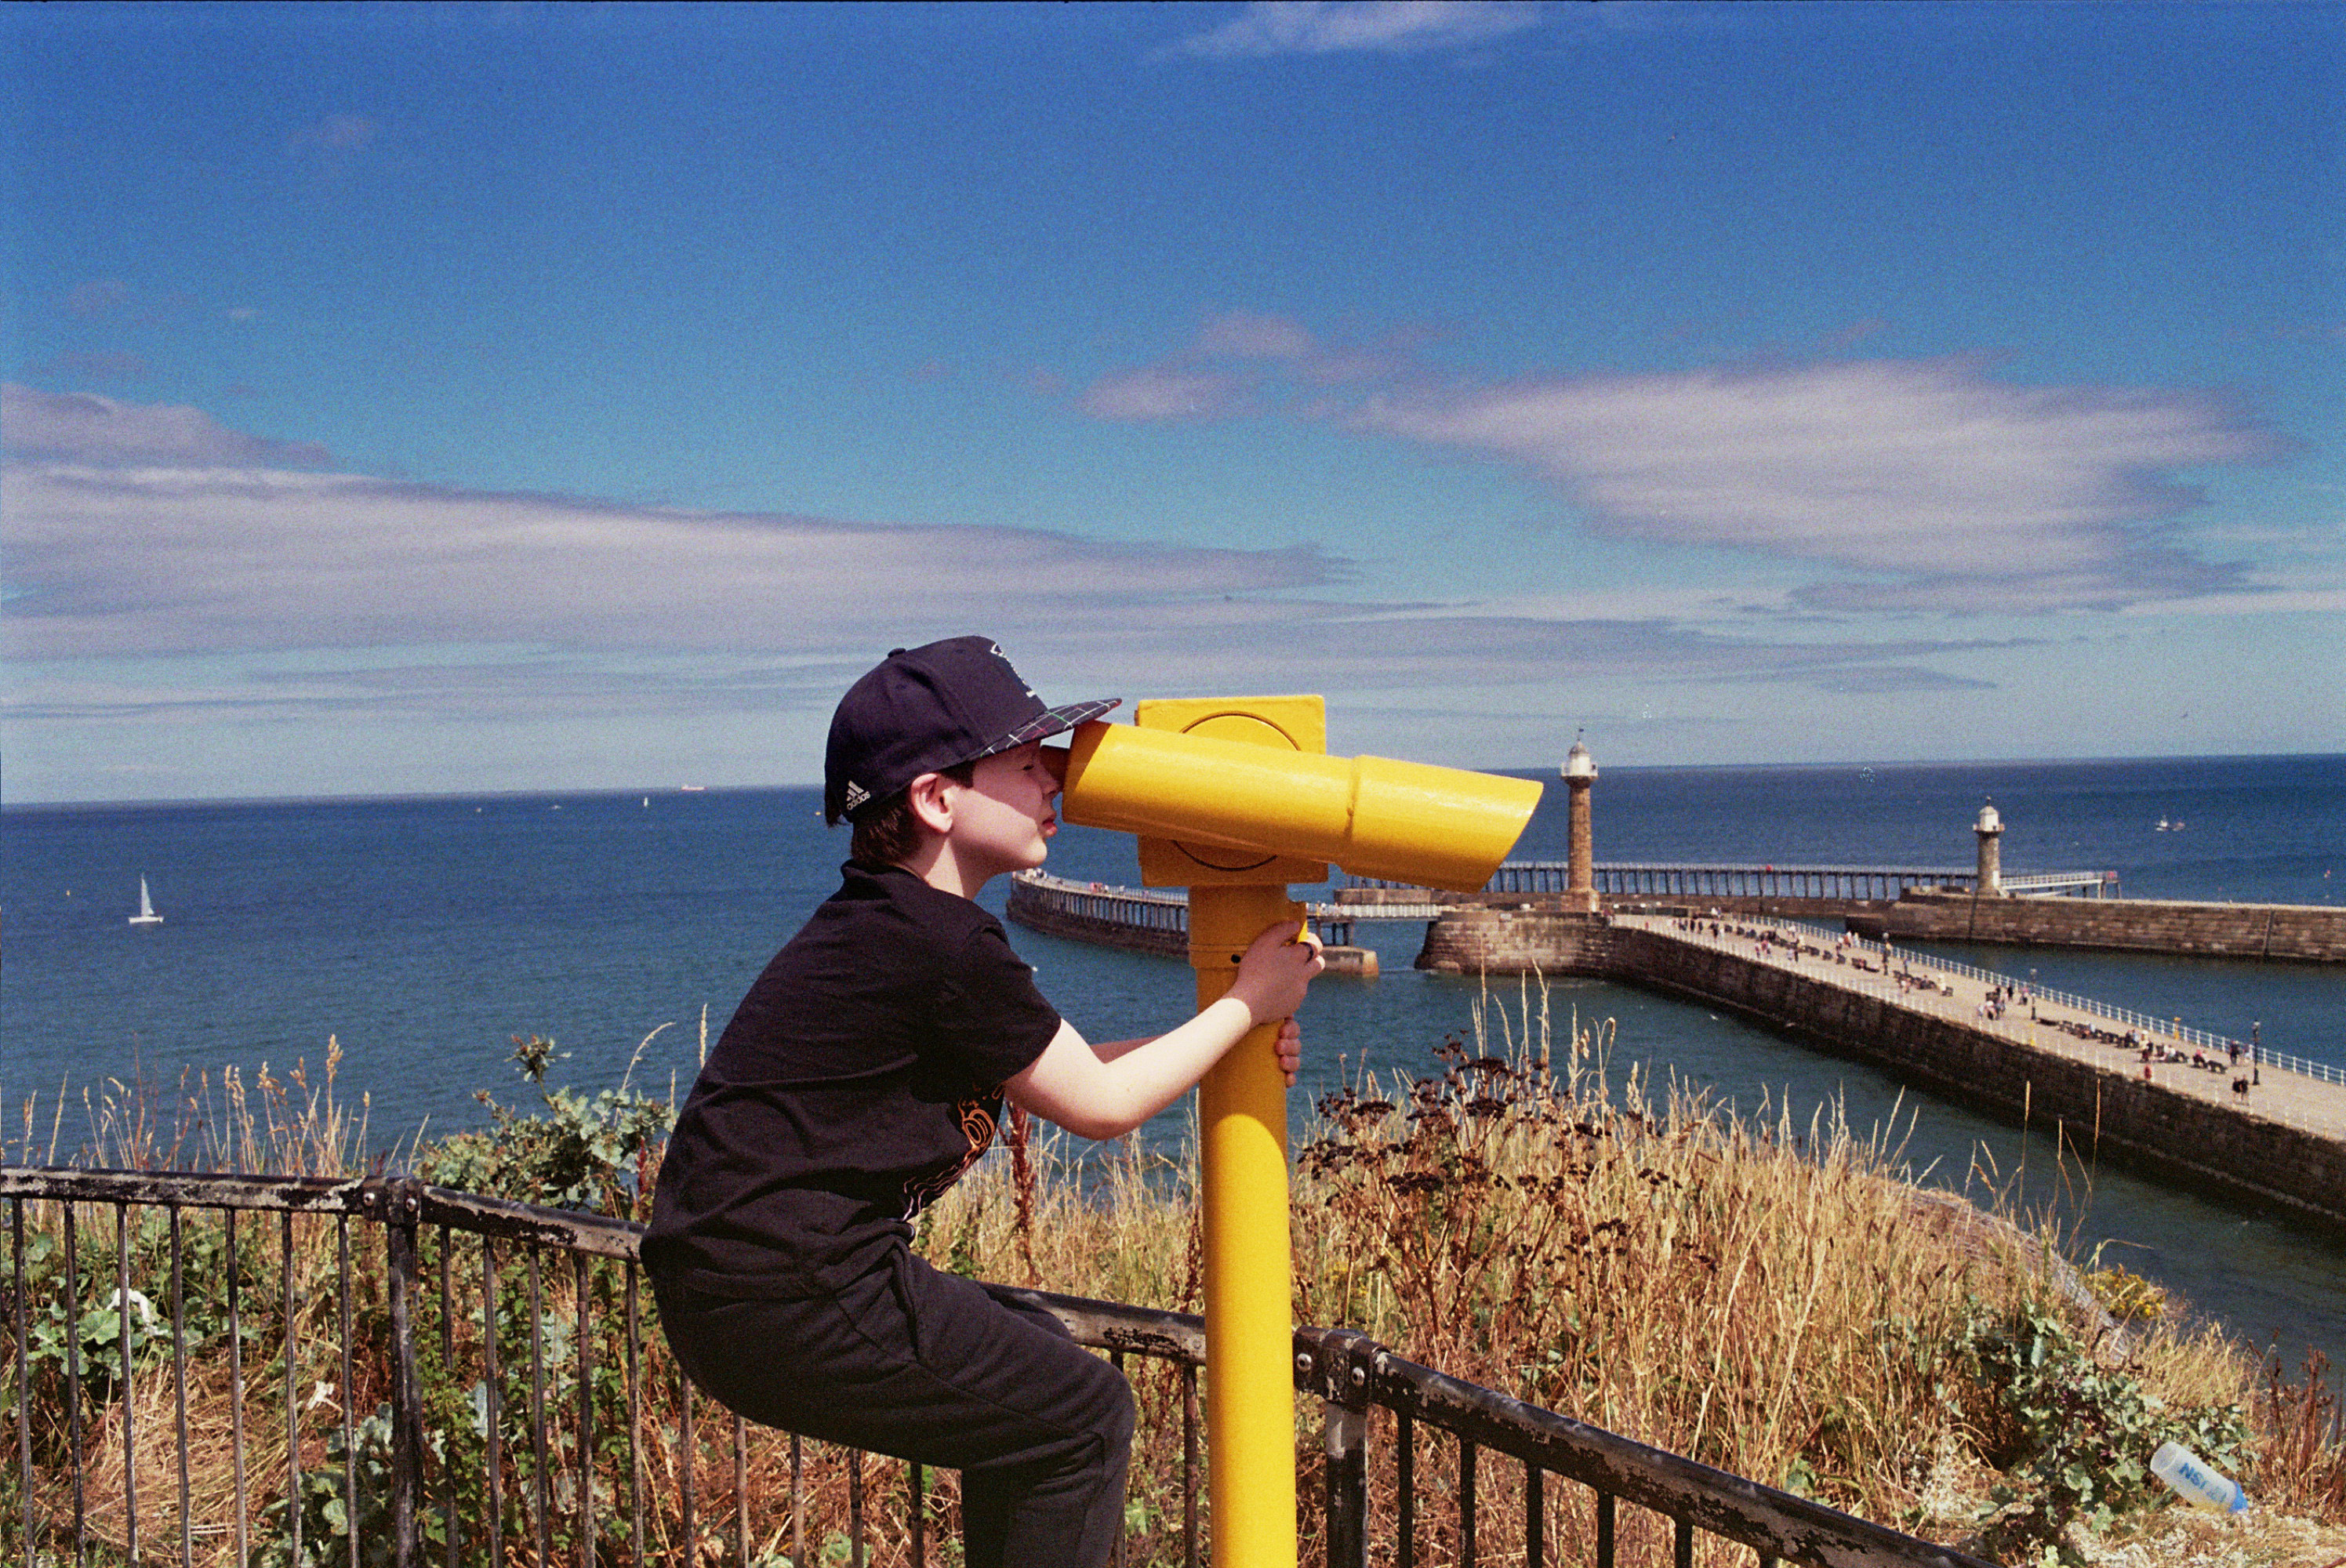 A boy looking through a telescope by the sea